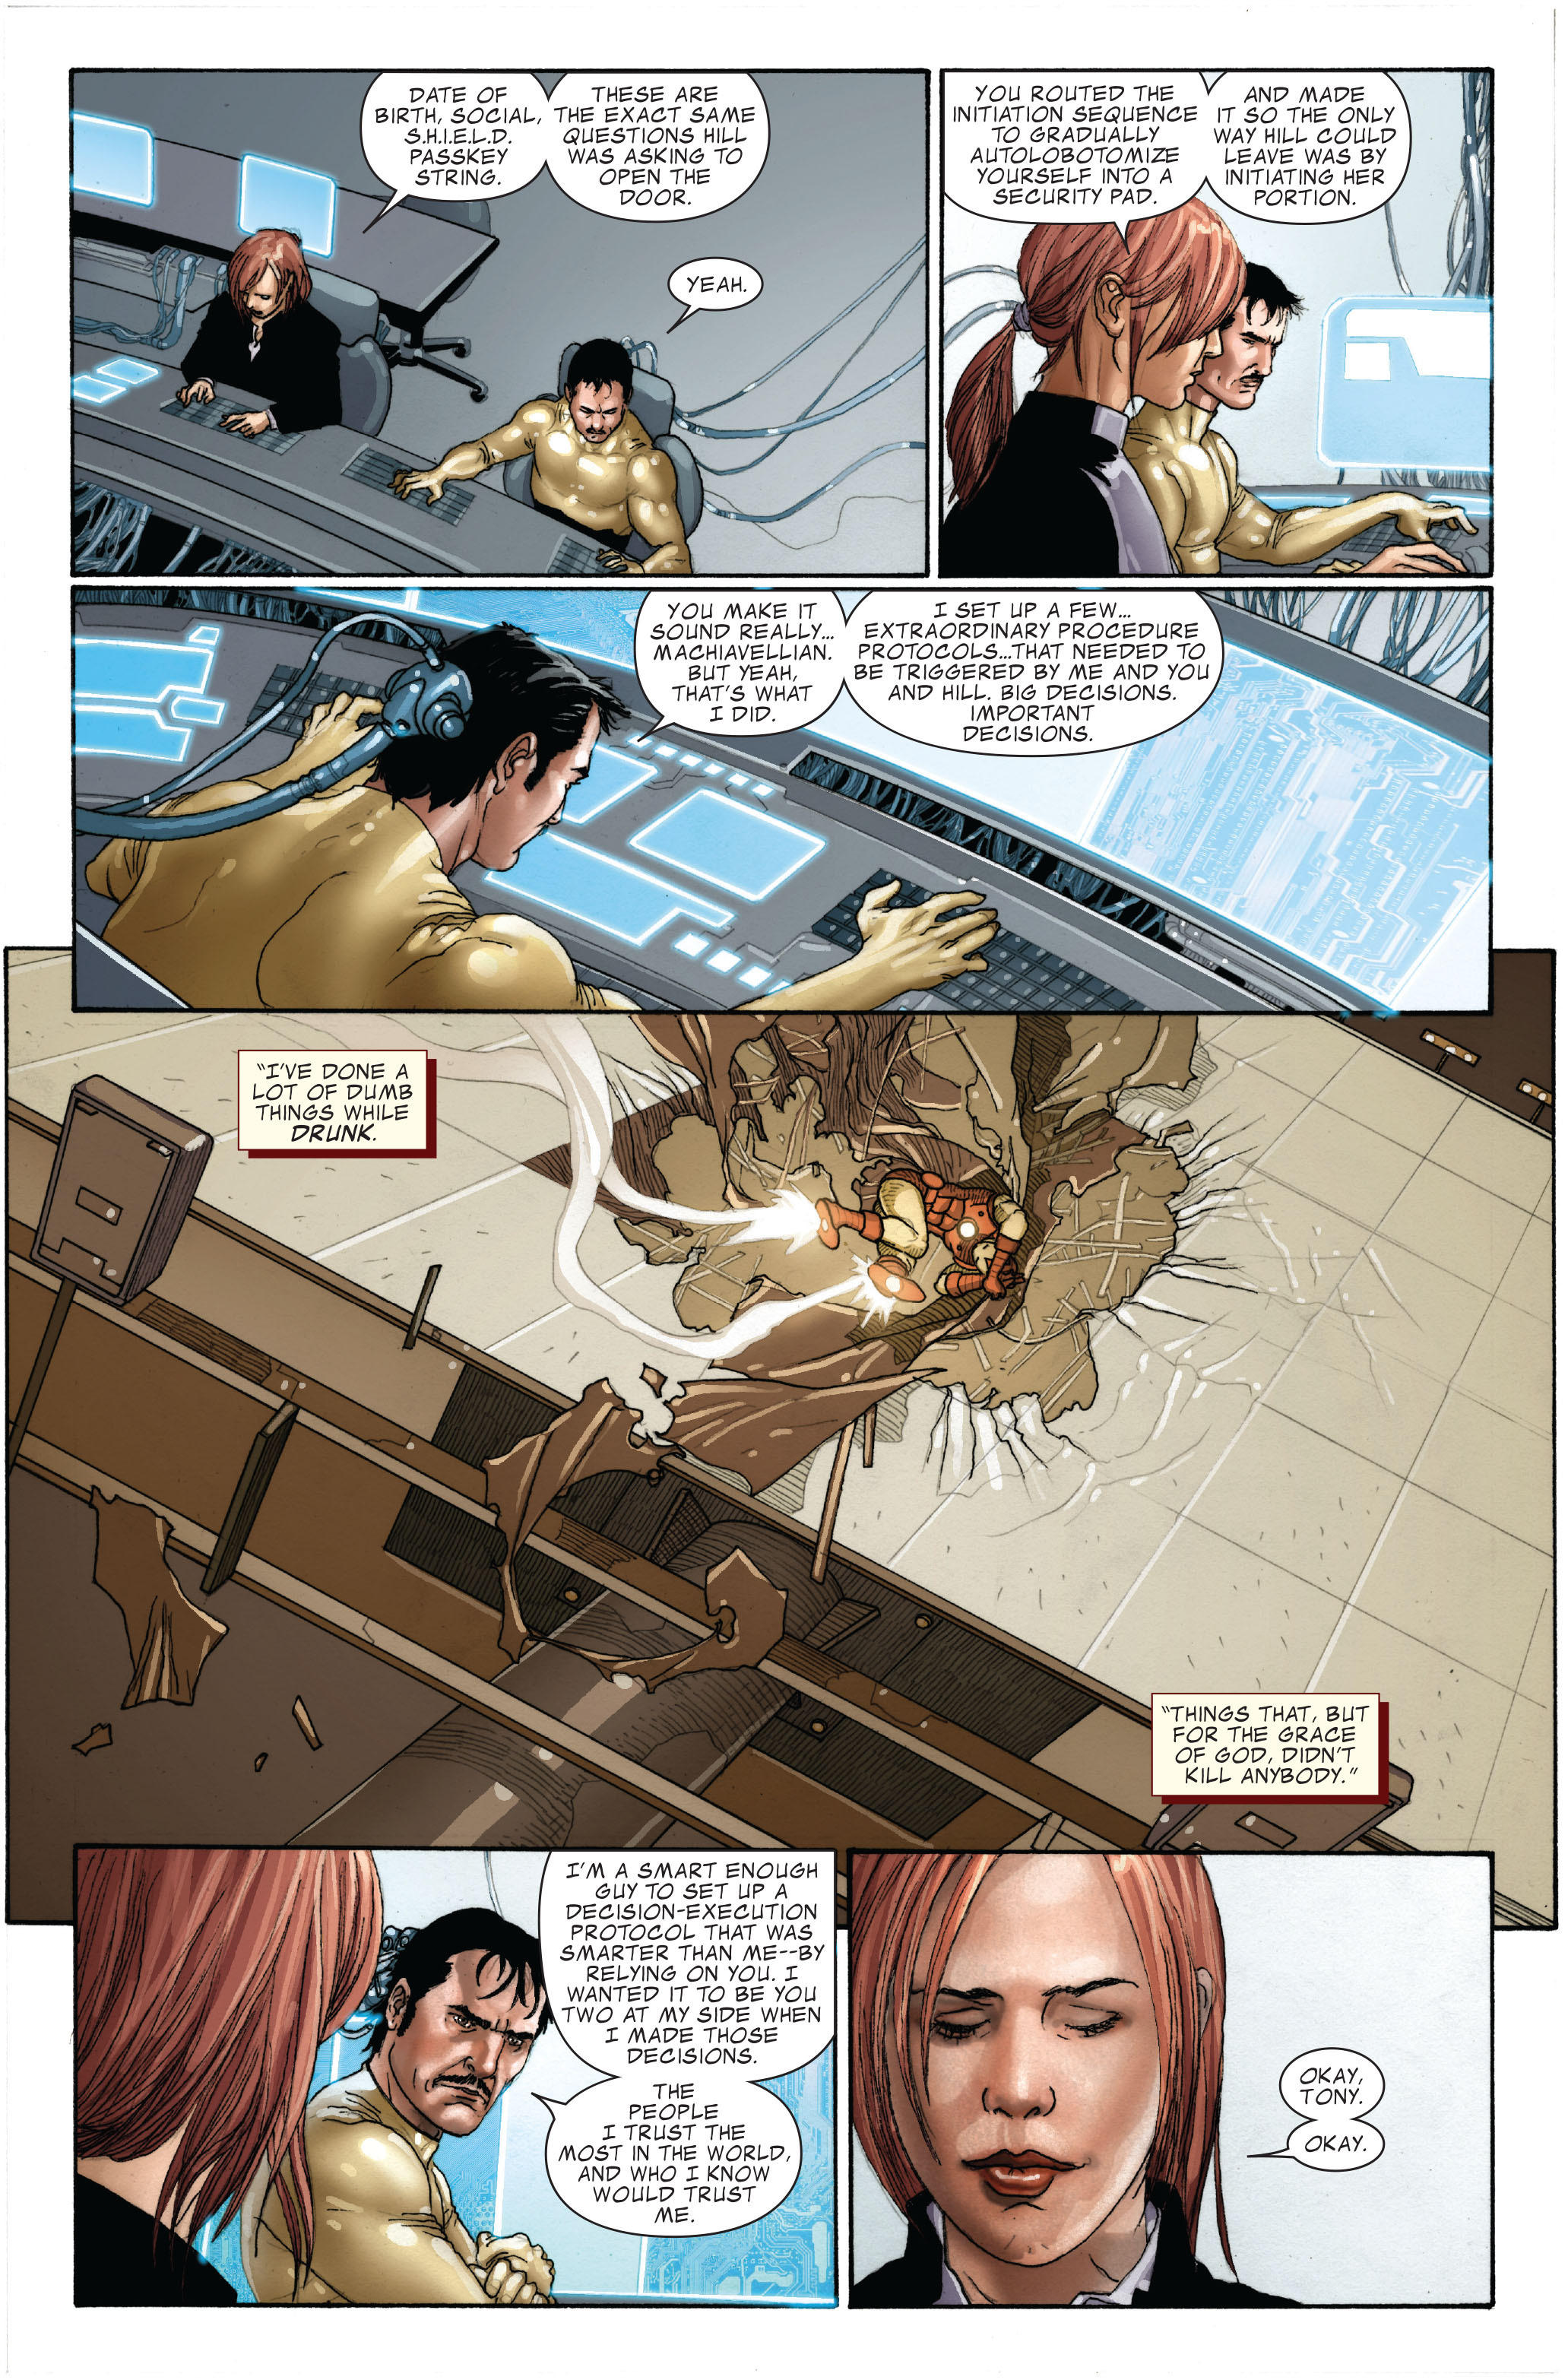 Invincible Iron Man (2008) 9 Page 17